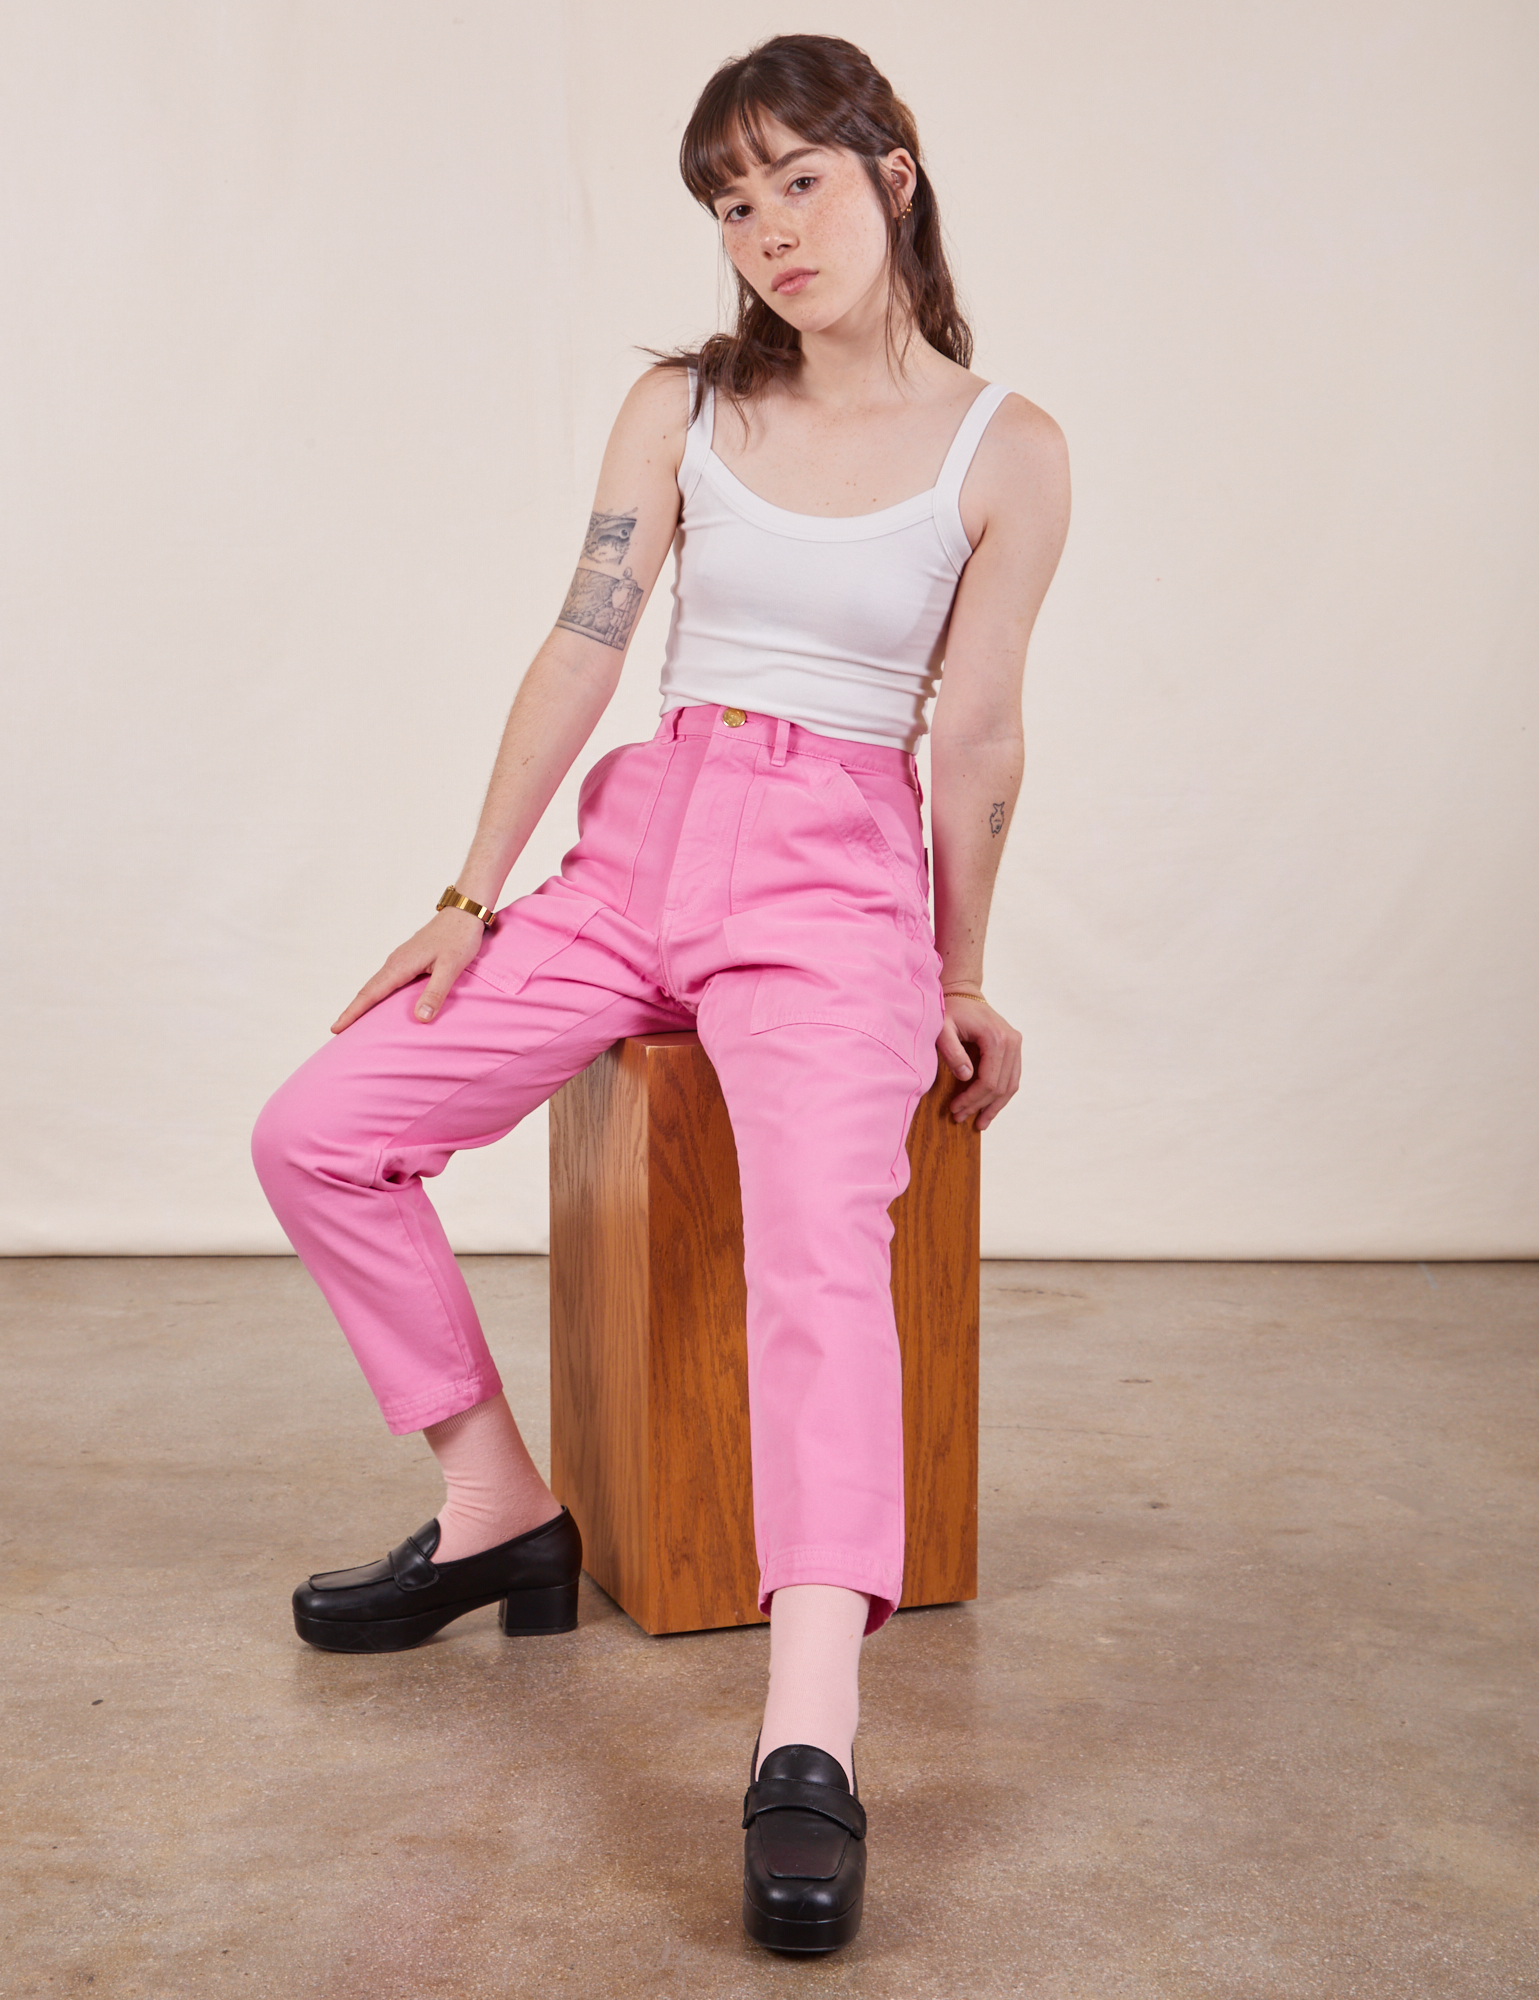 Hana is wearing Petite Pencil Pants in Bubblegum Pink and vintage off-white Cropped Cami